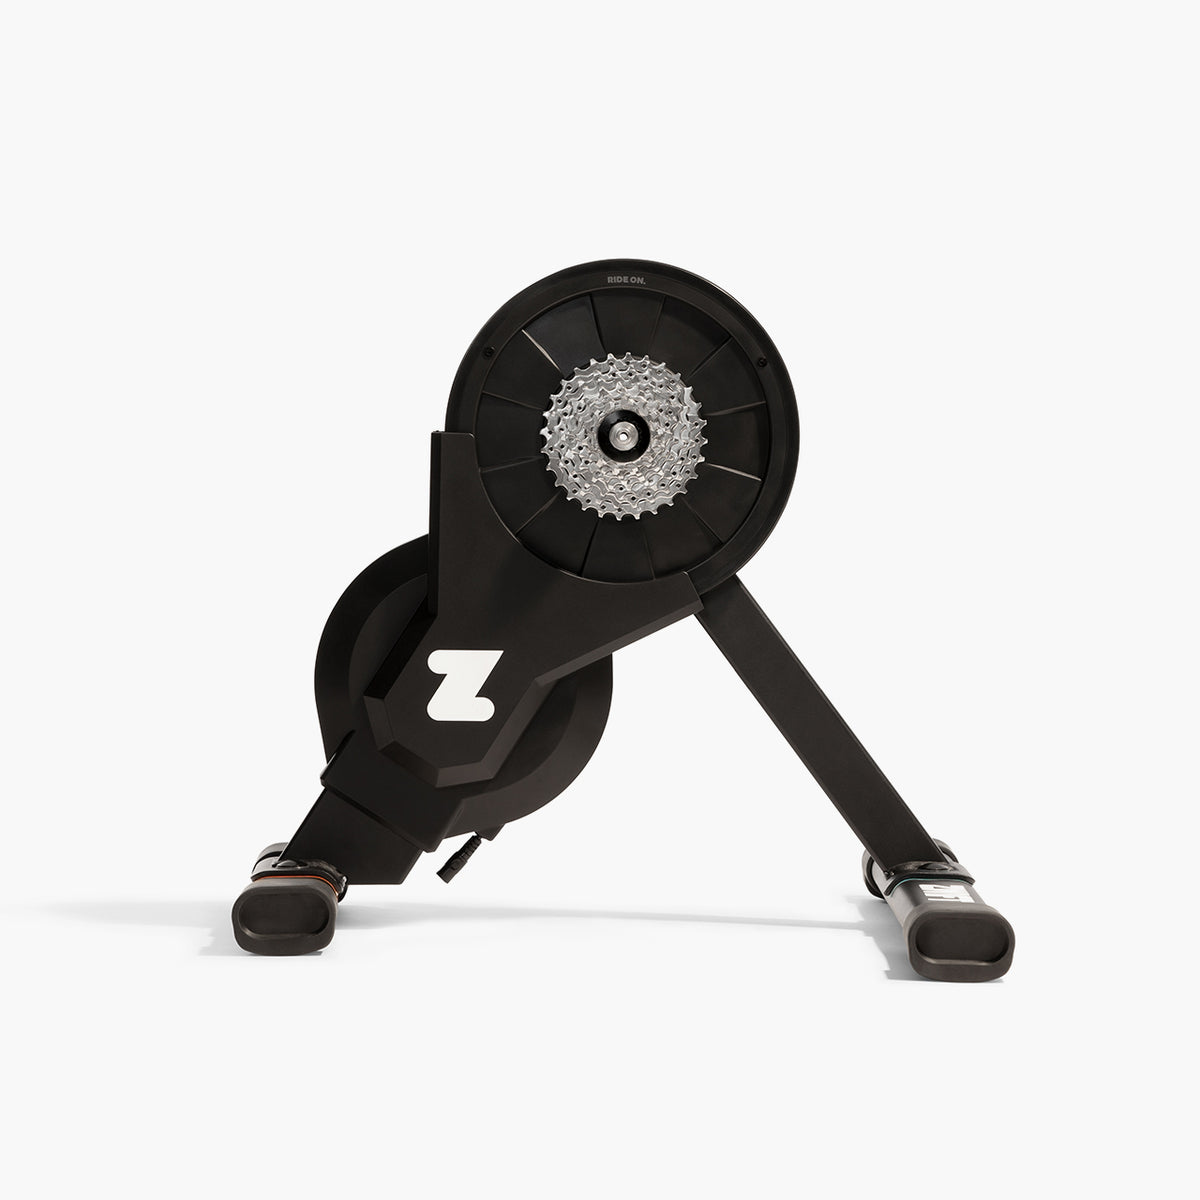 Zwift Hub Smart Turbo Trainer with 9 speed cassette